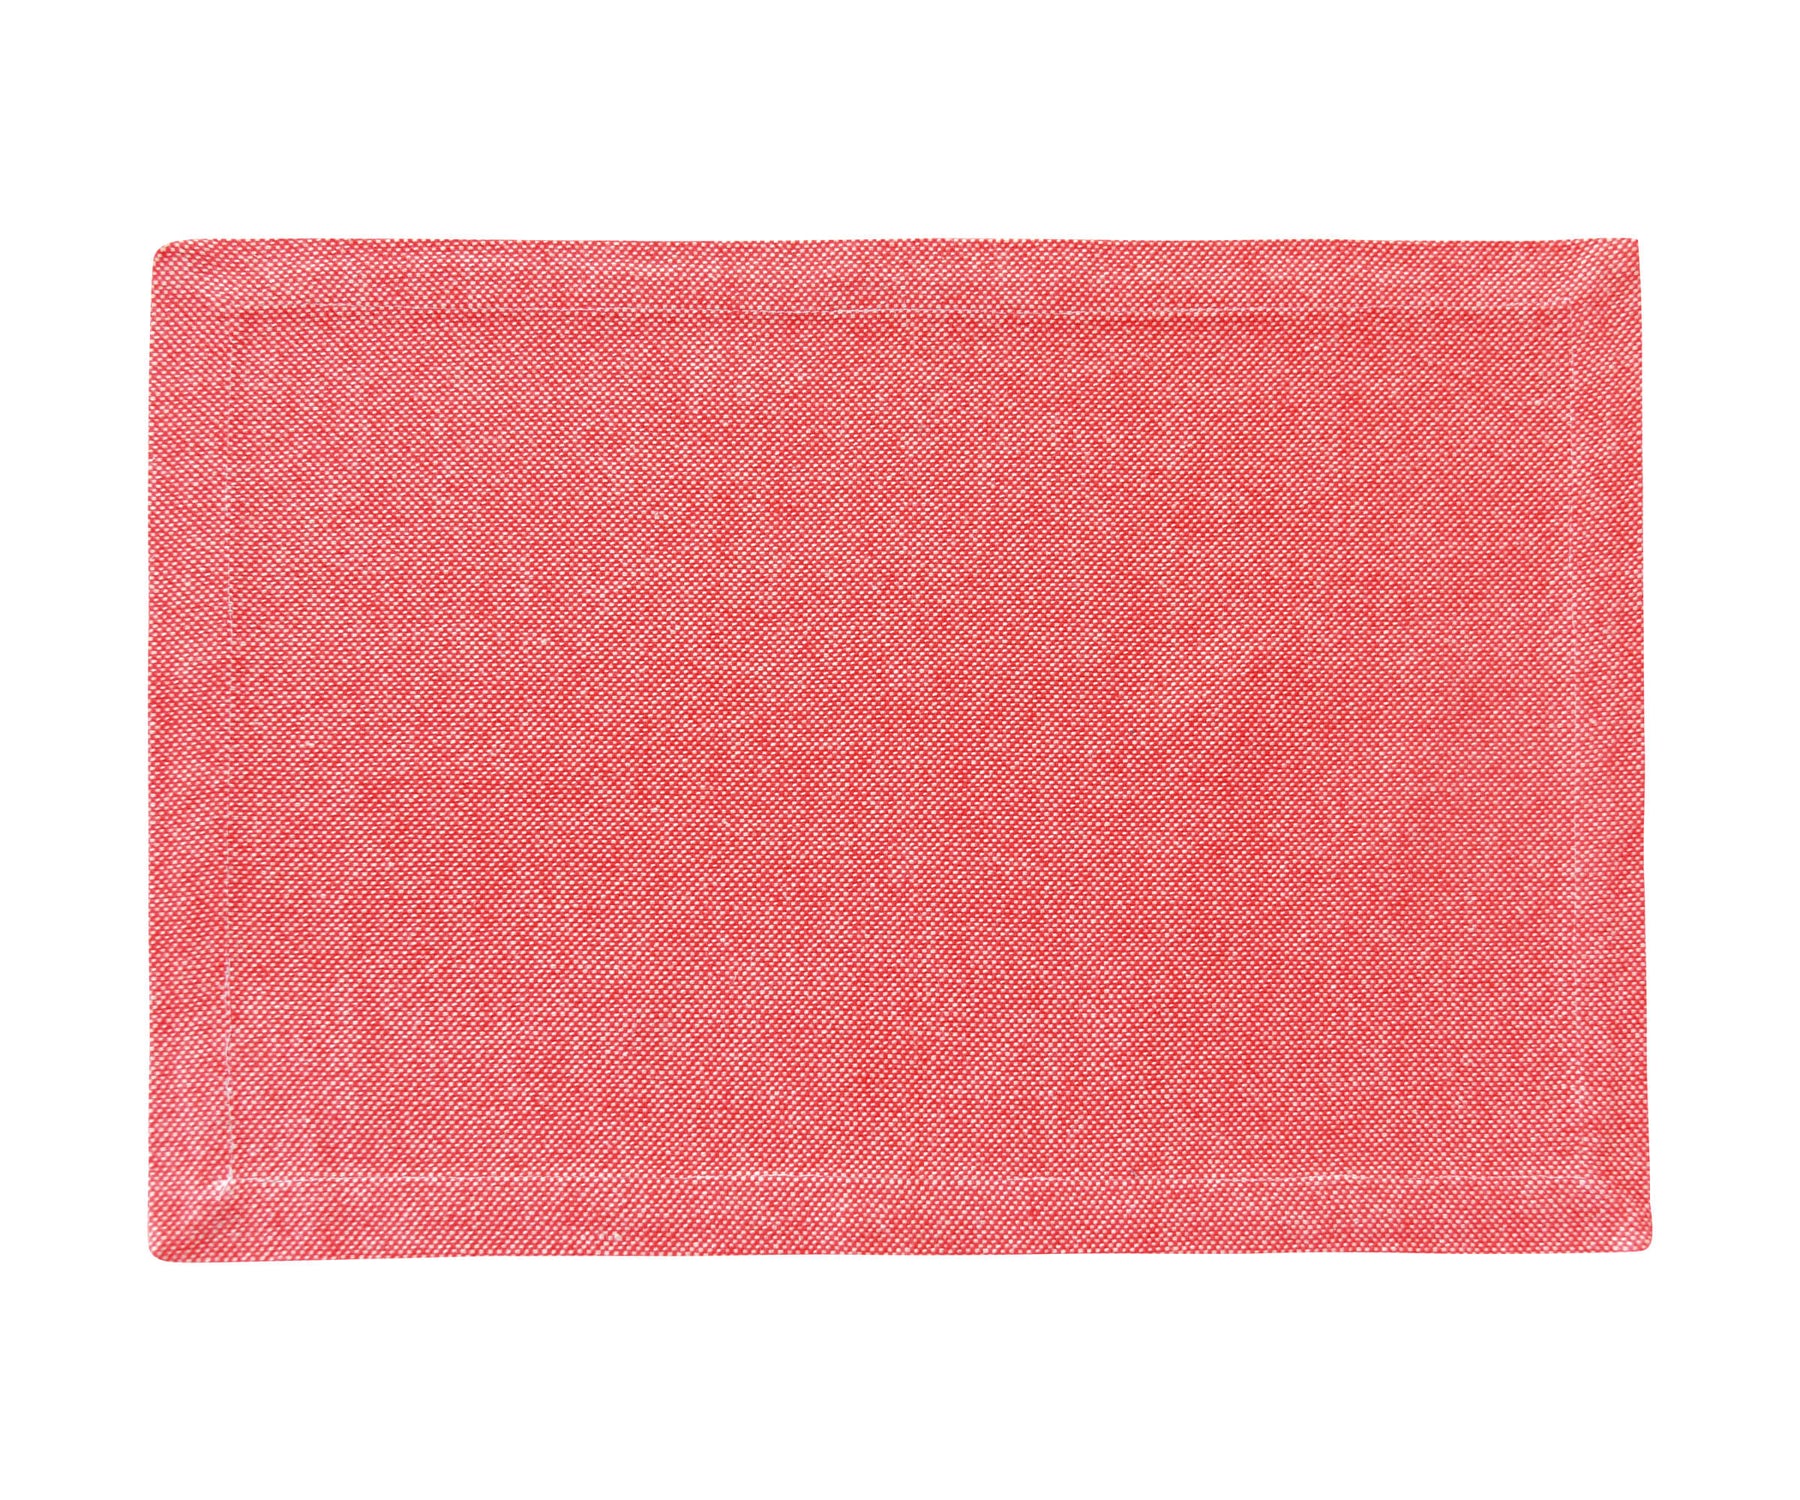 Red fabric table placemats - add a splash of color and protect your table. Upgrade your dining experience with these stylish essentials. 